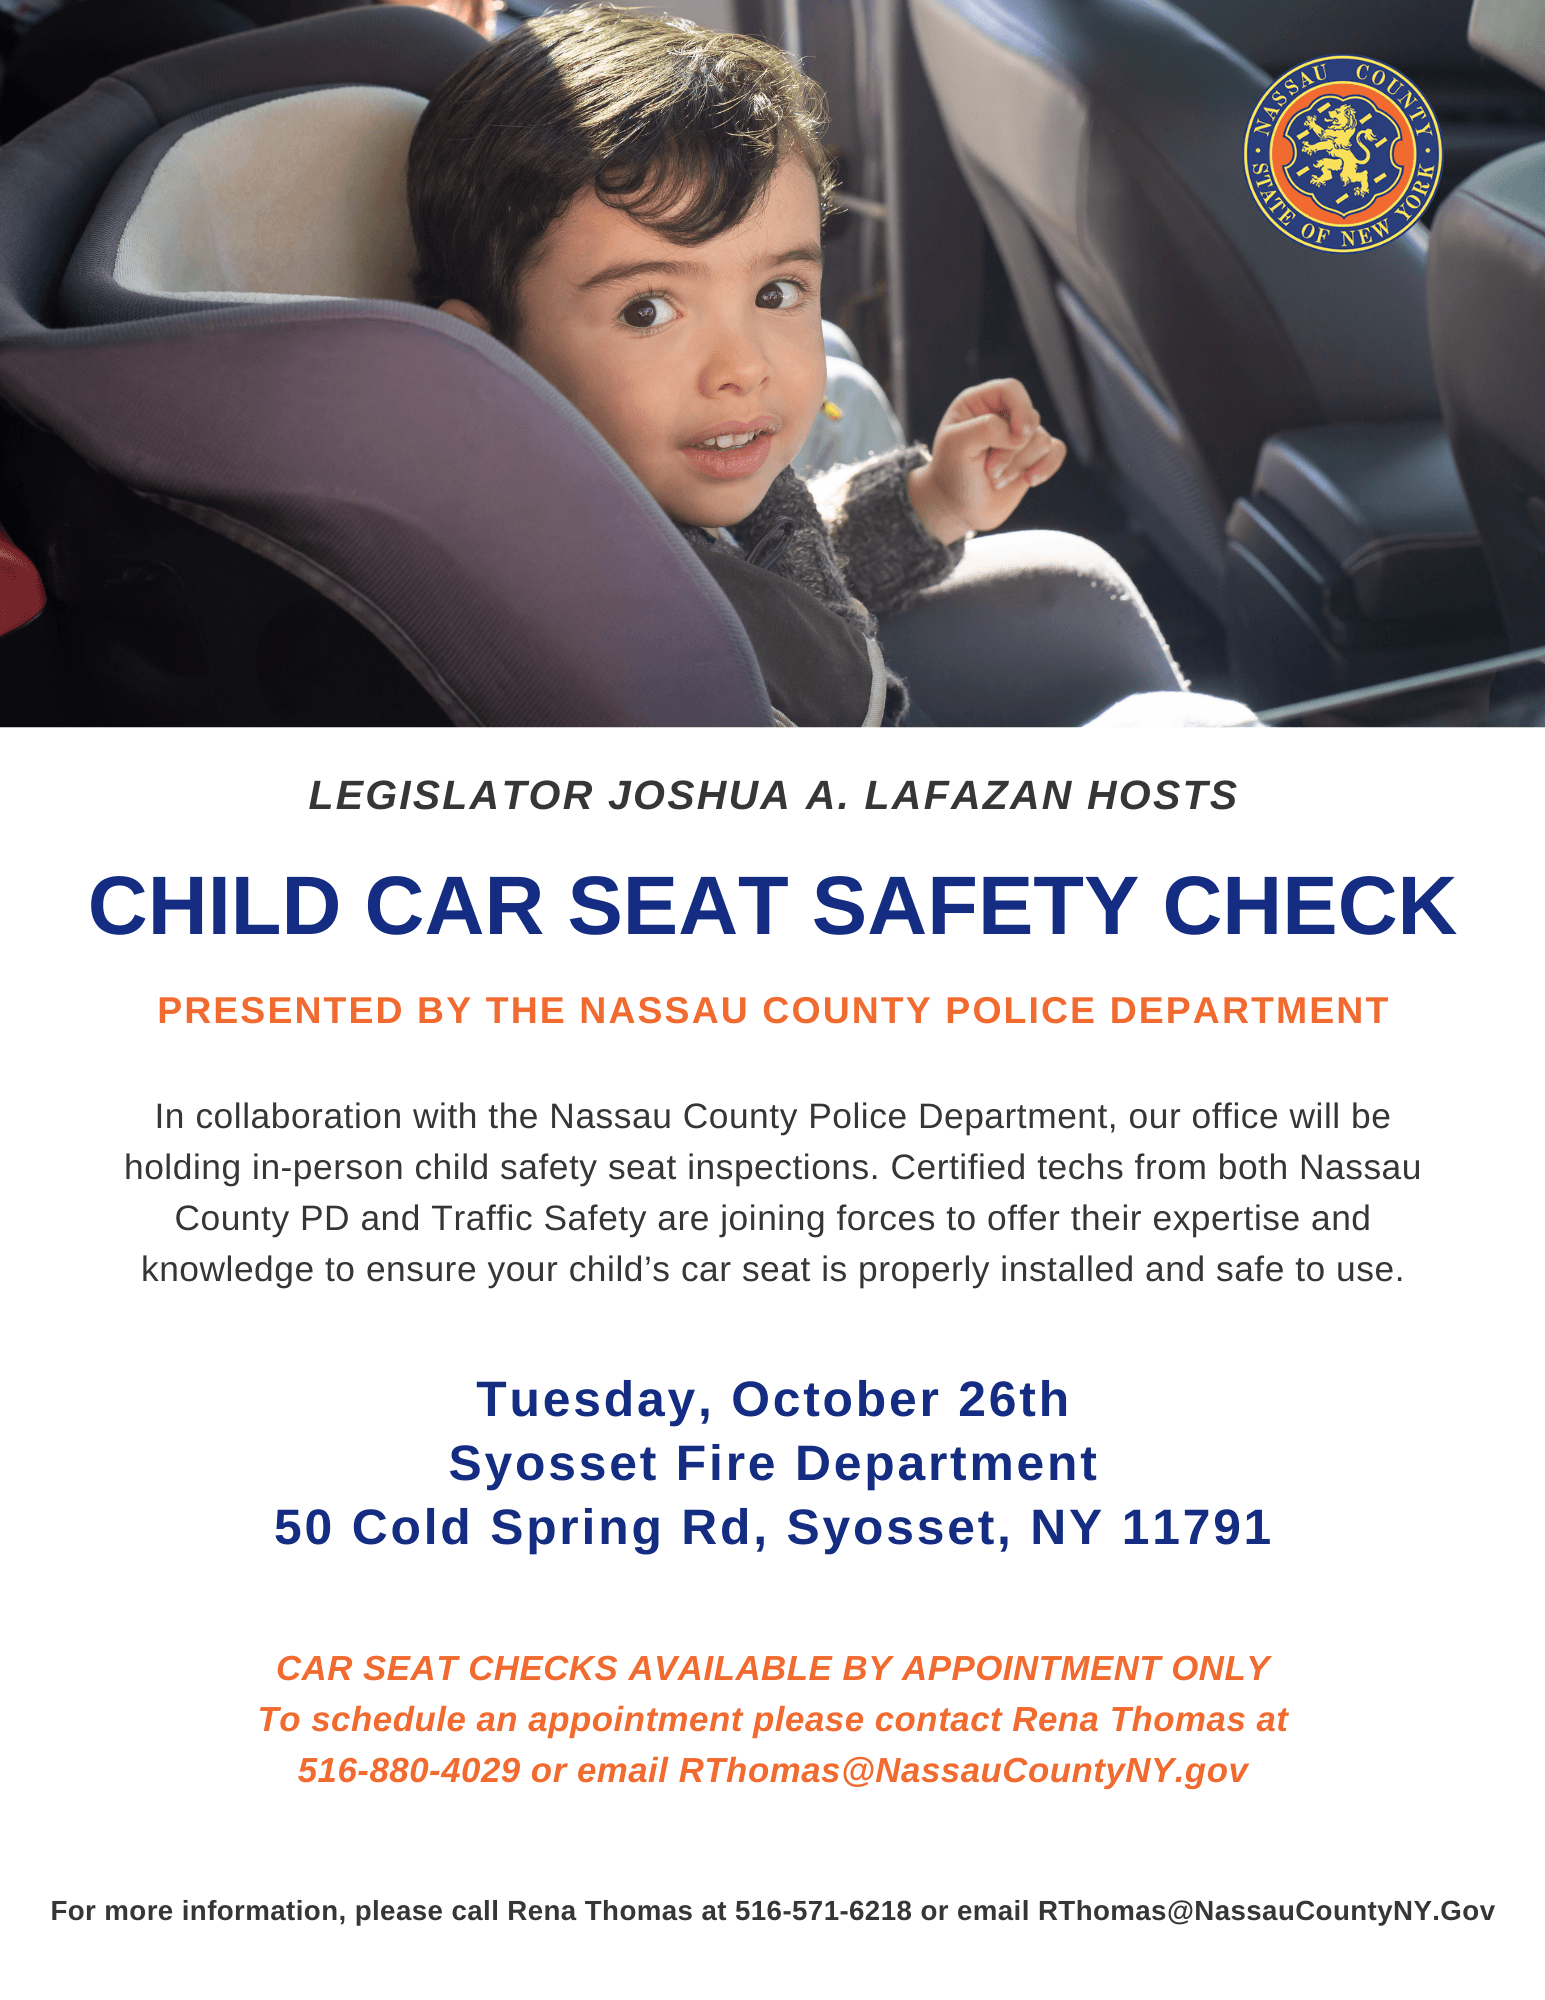 Child Car Seat Safety Check